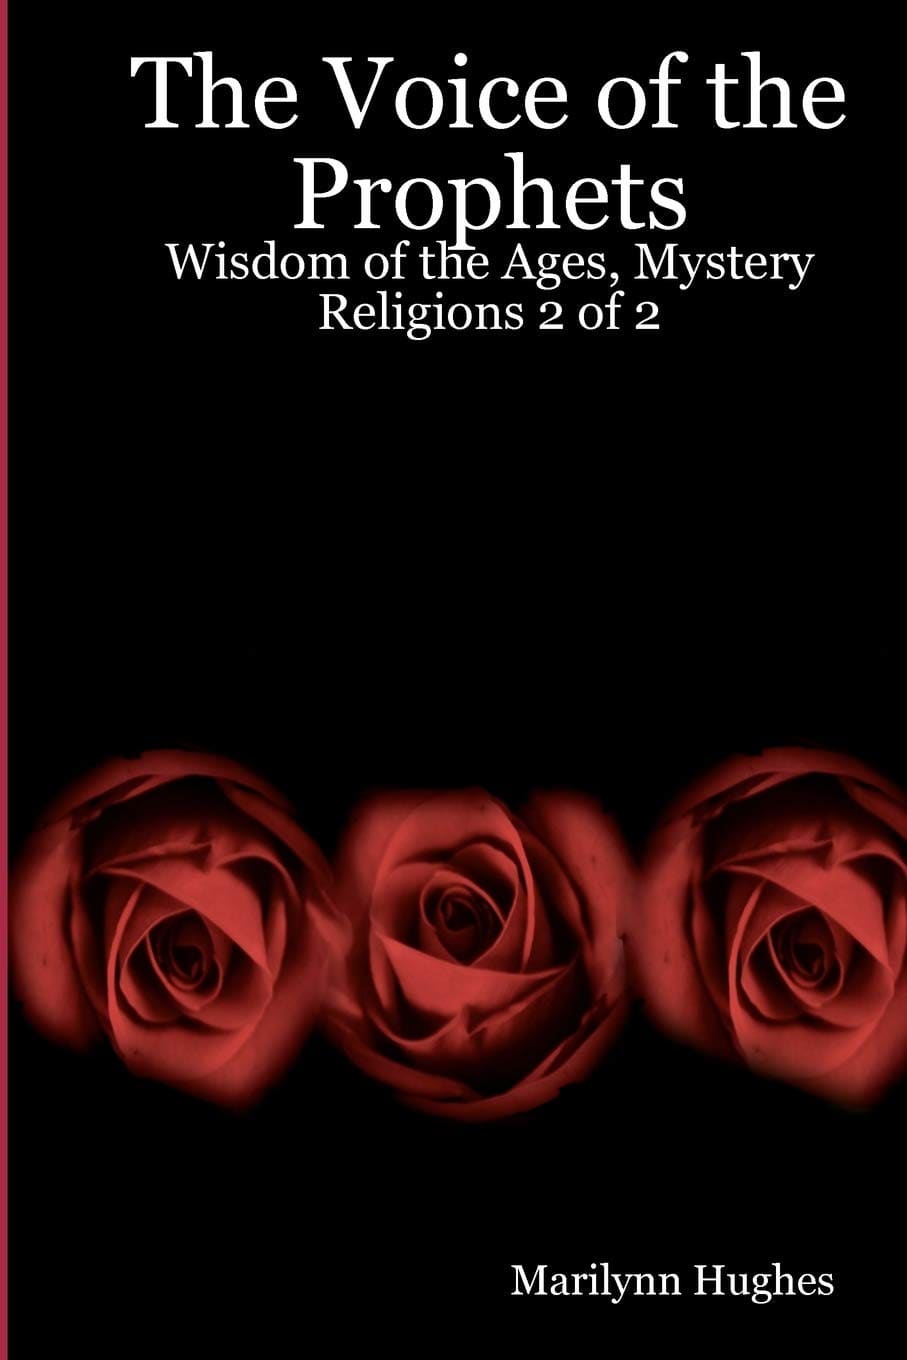 Wisdom of the Ages, Mystery Religions 2 of 2, By Marilynn Hughes - An Encyclopedia of Ancient Sacred Texts in Twelve Volumes - An Out-of-Body Travel Book